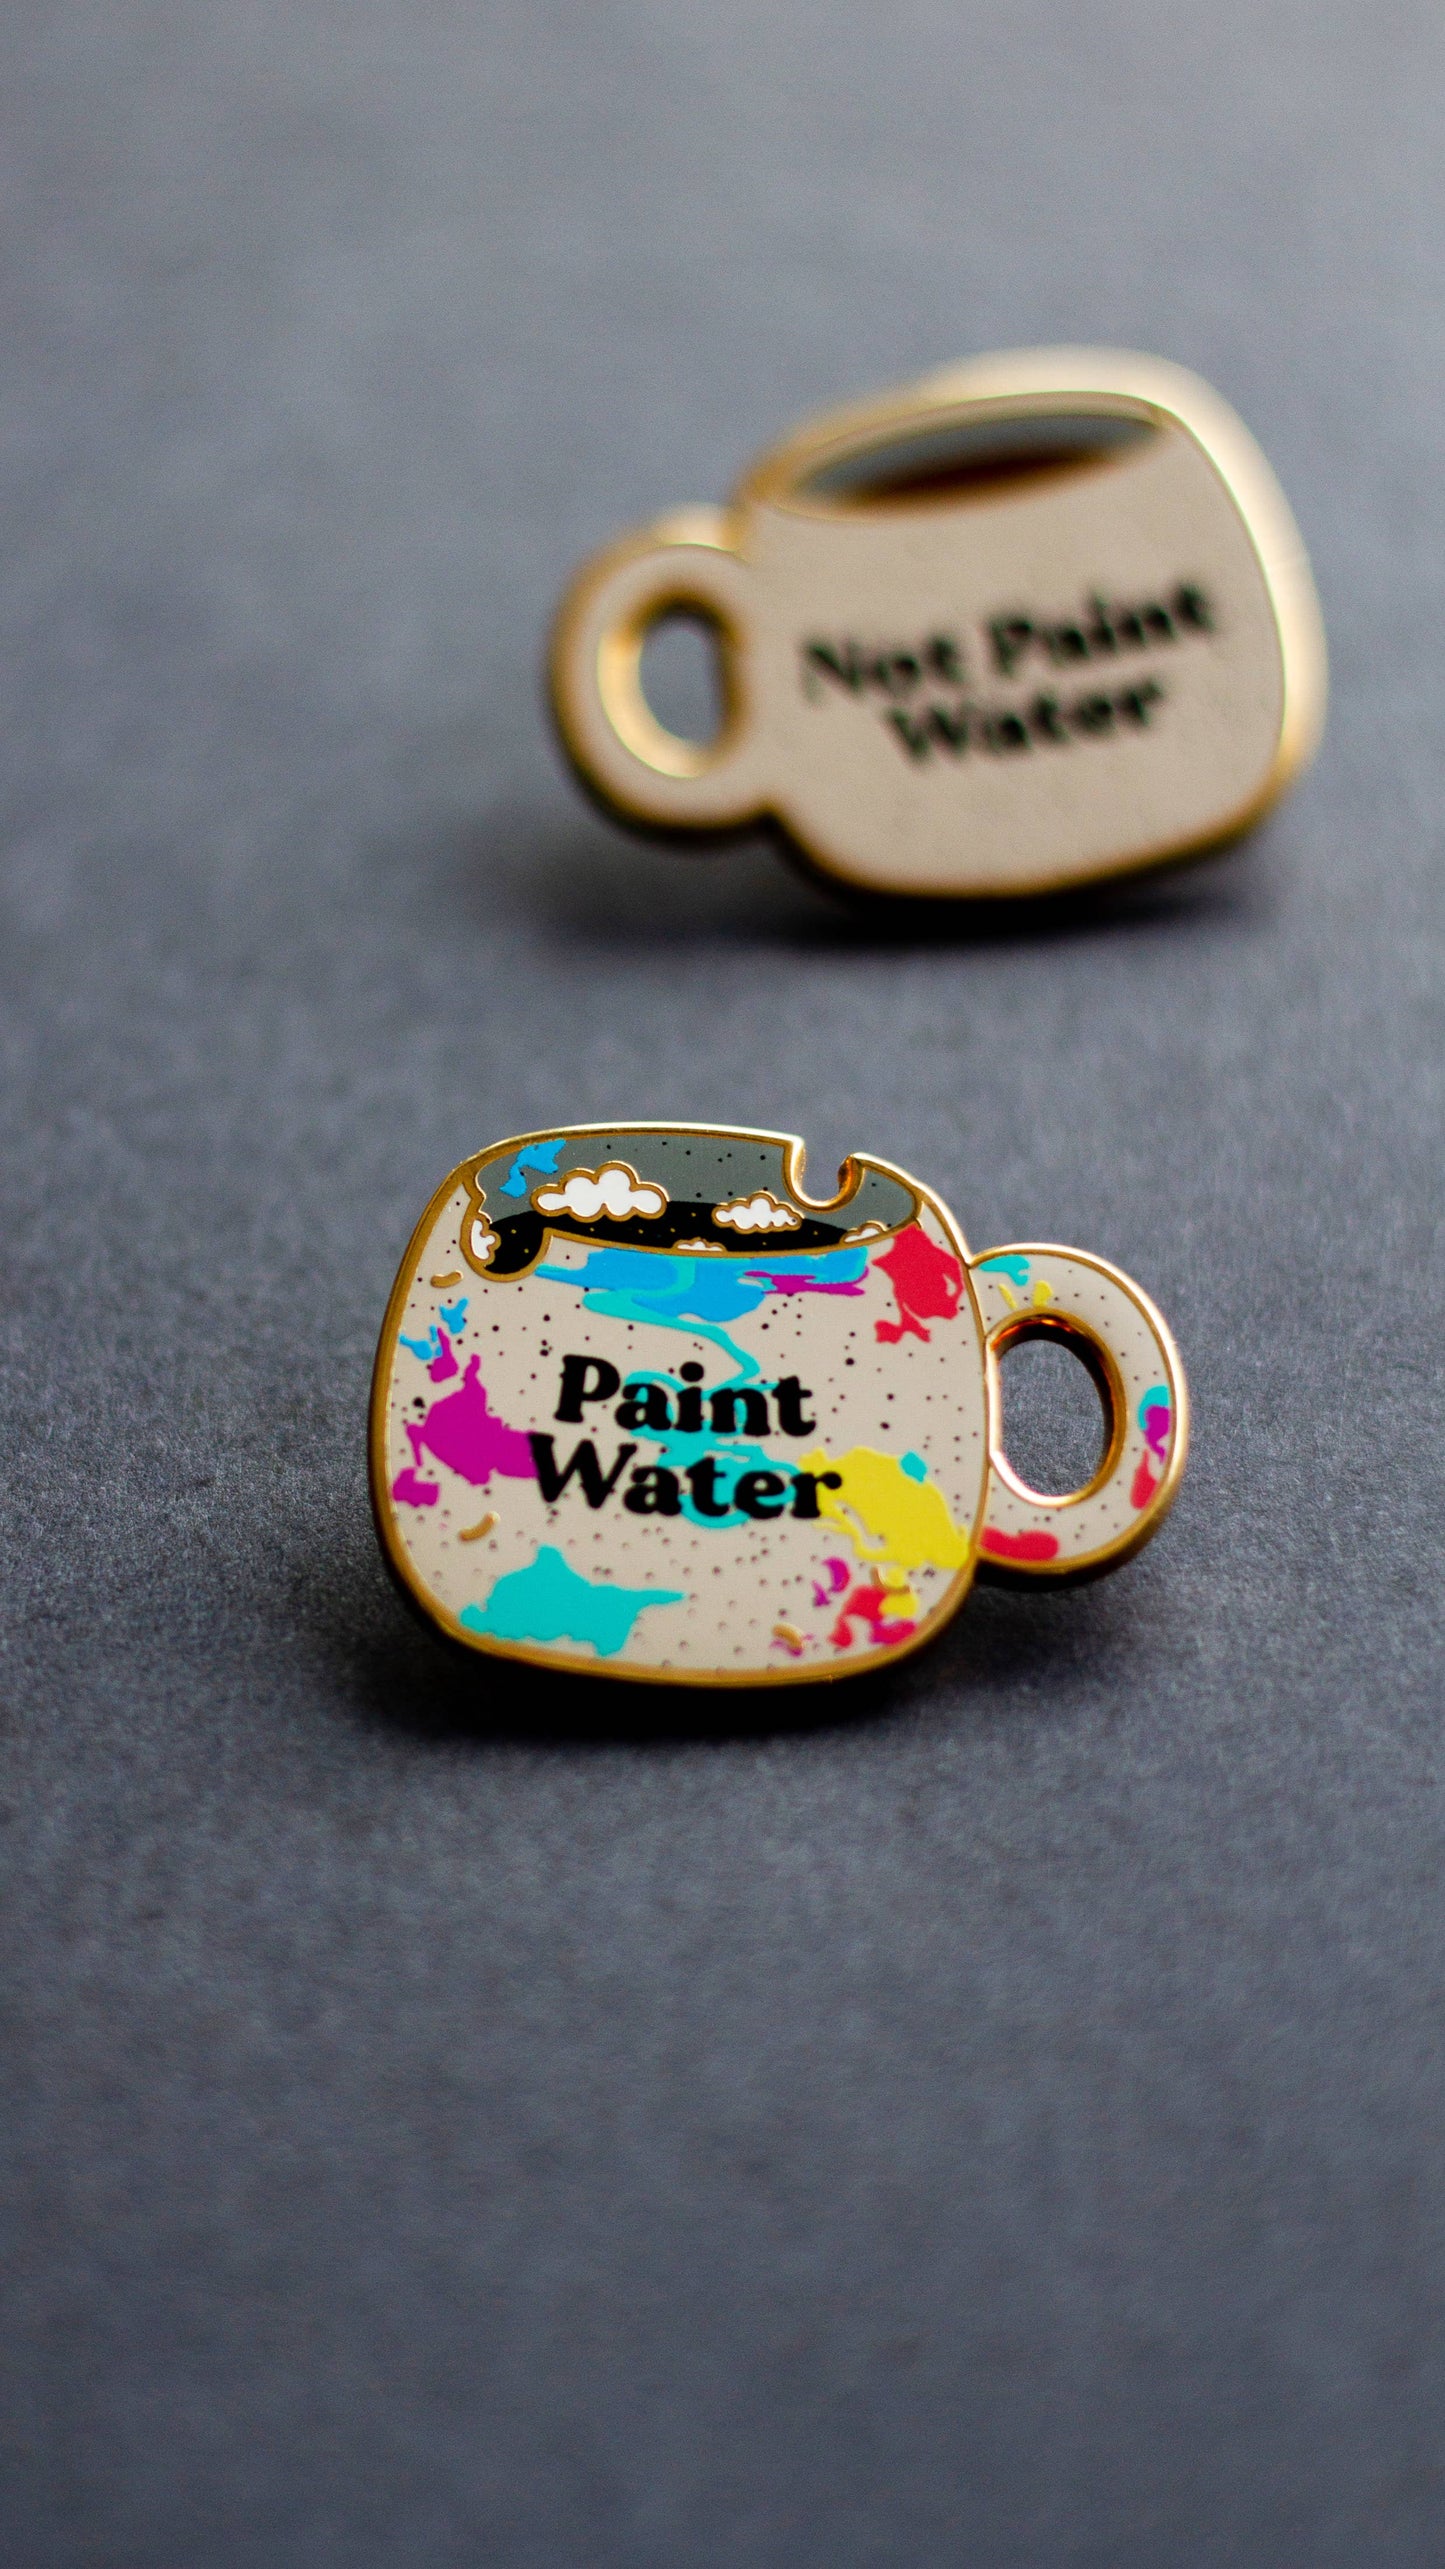 Paint Water Cup Enamel Pin, Watercolor Gift, Artist Gift